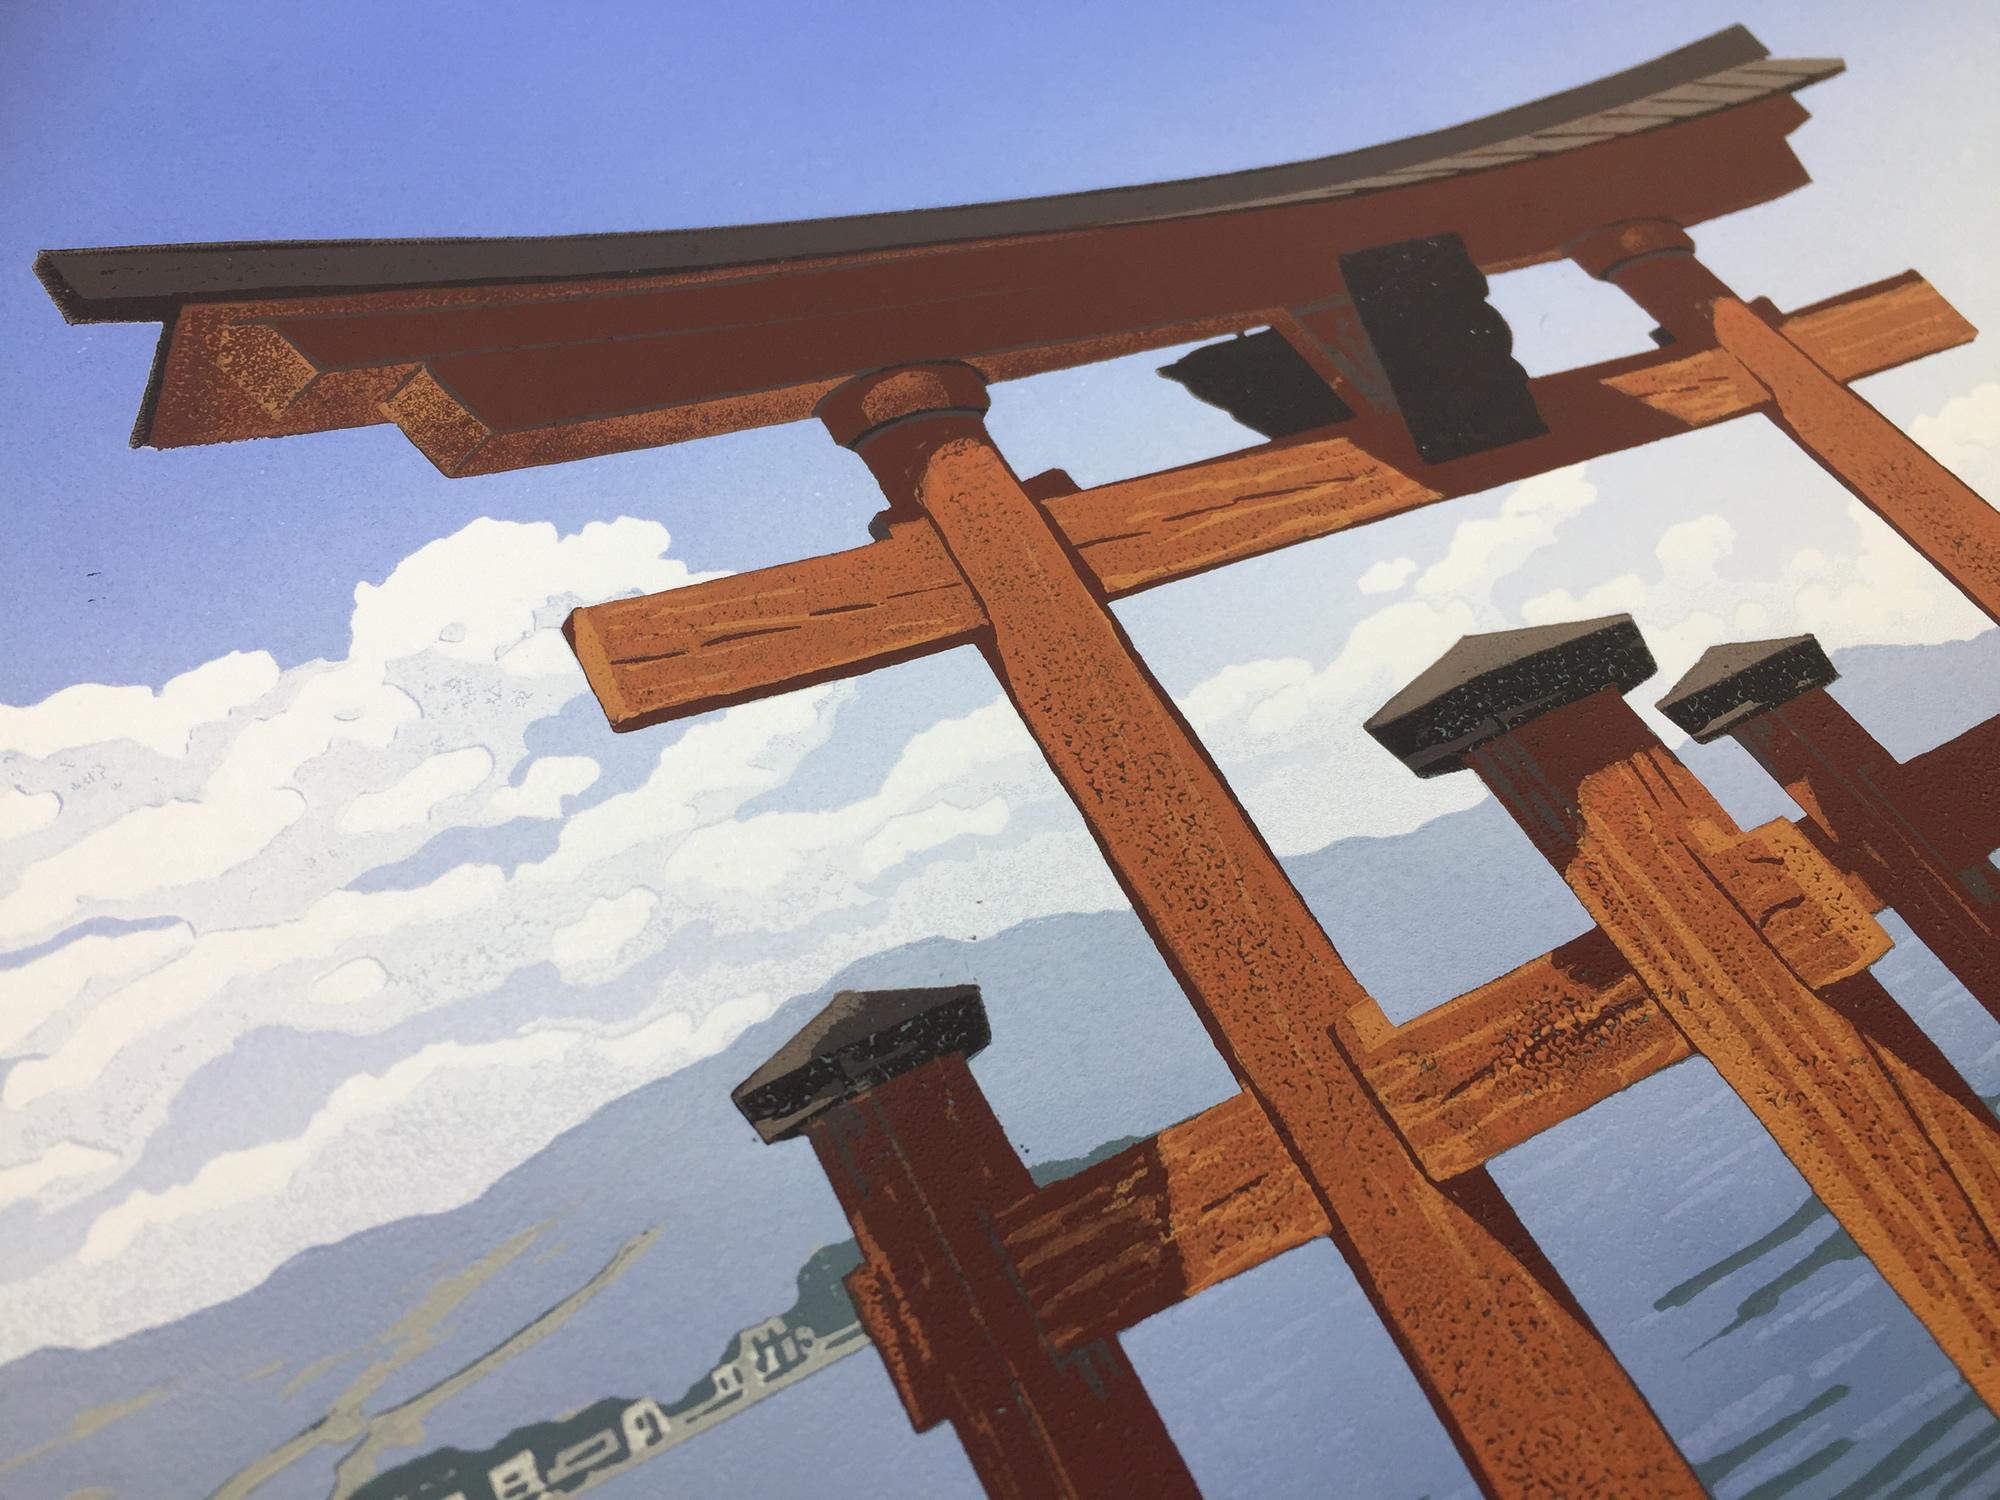 Alexandra Buckle
Torii Sea View
Signed by the artist
Limited Edition Linocut on Paper
Edition of 12
Image size: 30 cm x 40 cm x 0 cm
Sheet Size: 37 cm x 47 cm x 0.1 cm
Please note than insitu images are purely an indication of how a piece may